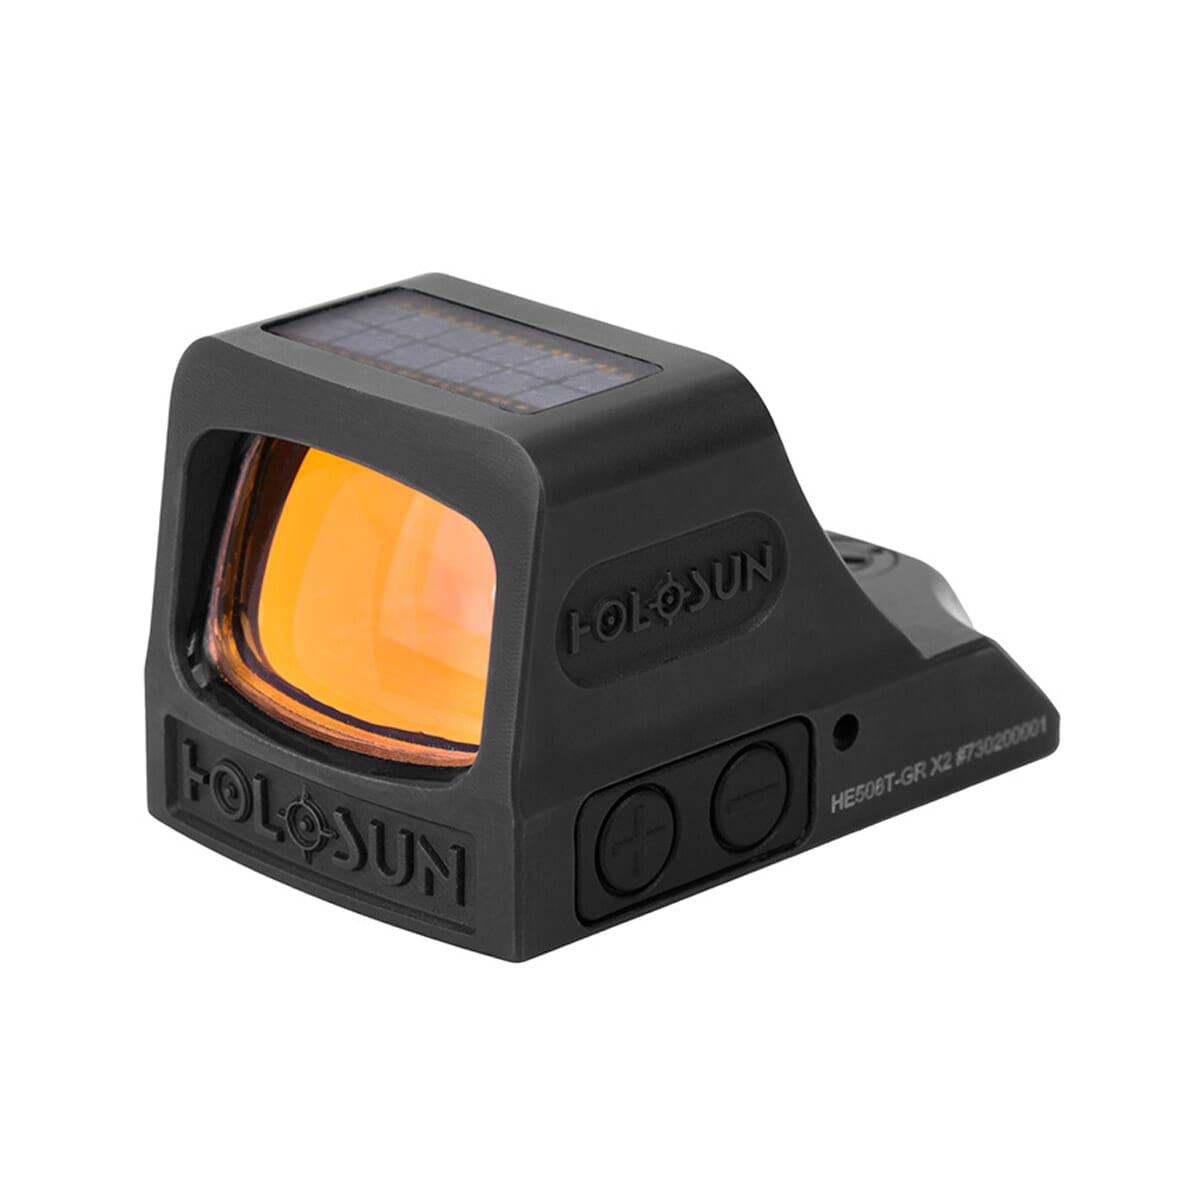 Holosun HE508T-RD-X2 Titanium Multi-Reticle Circle Dot Open Reflex Sight with Solar Failsafe and Shake Awake HE508T-RD-X2